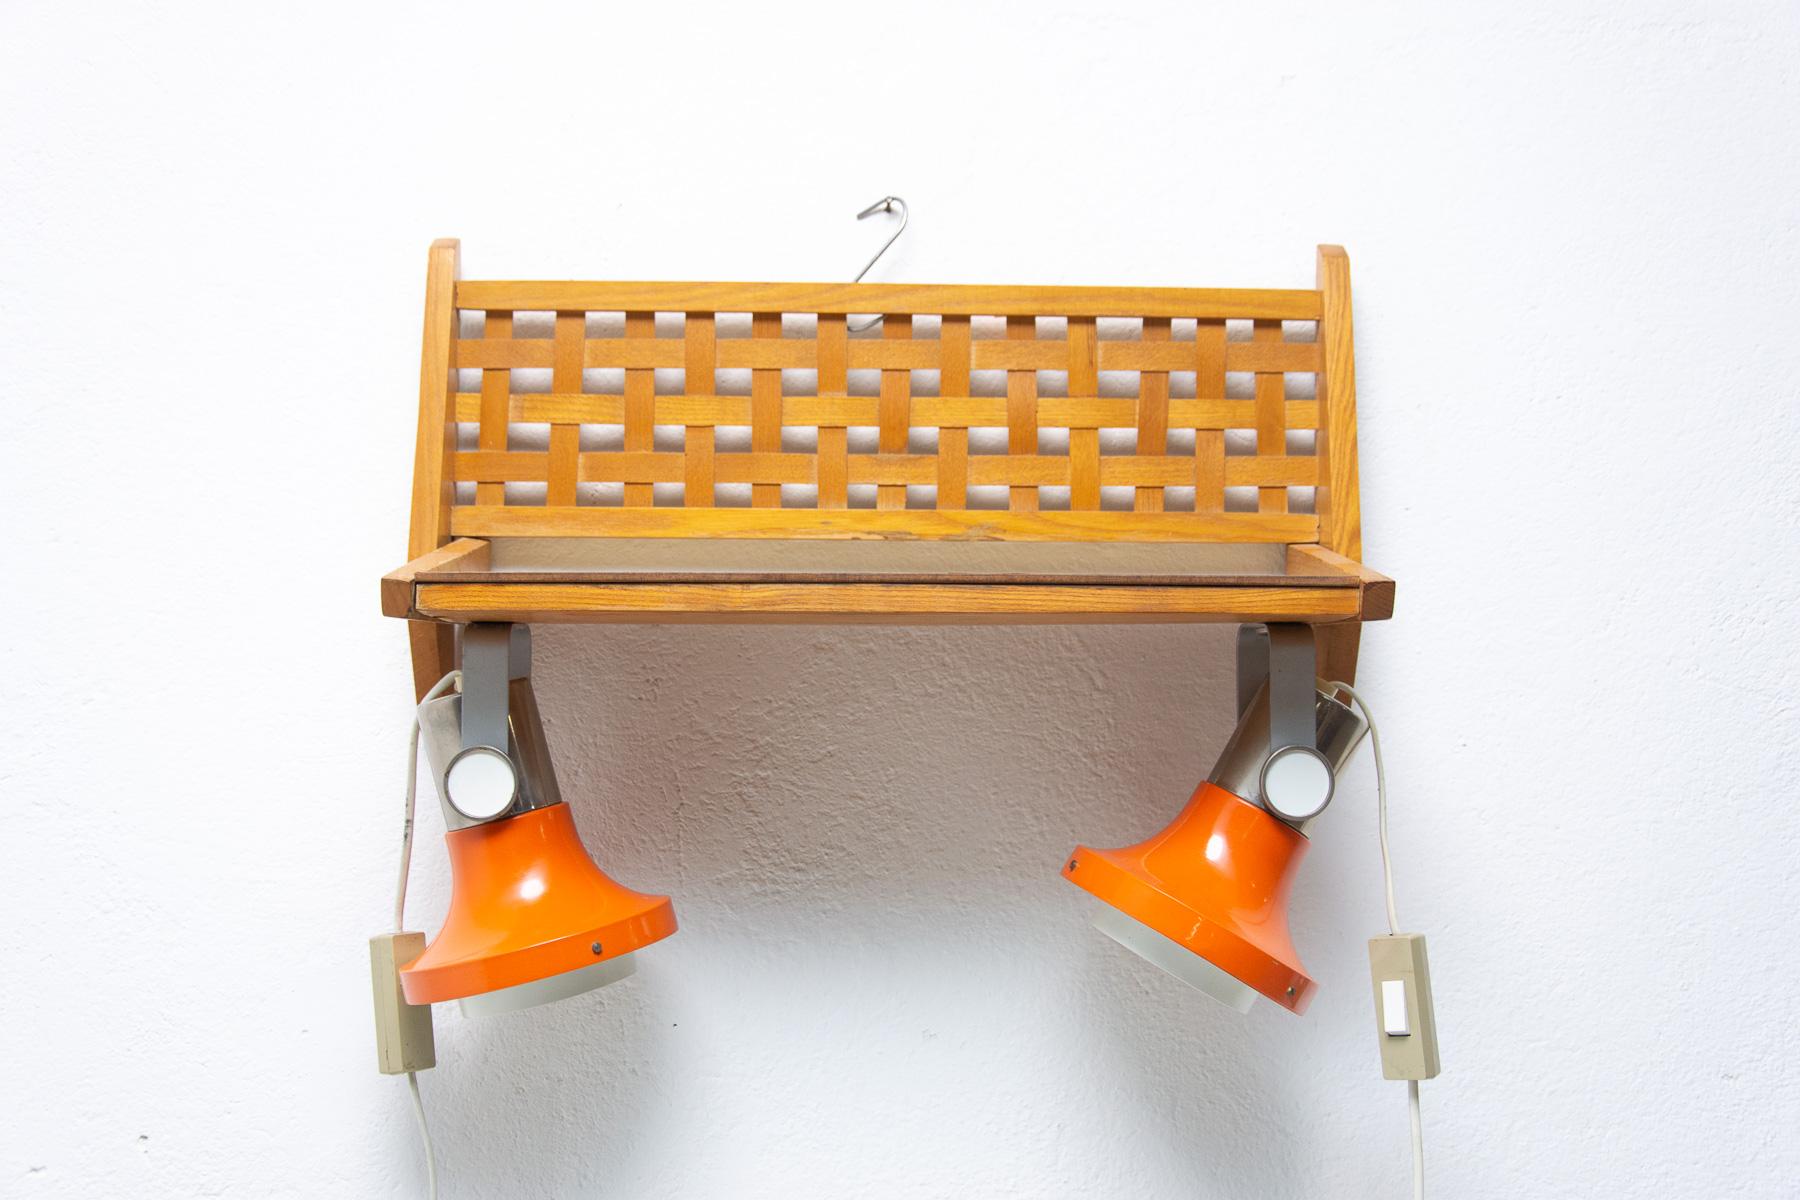 Mid century wooden shelf made by ULUV company in the former Czechoslovakia in the 1960´s.
It´s made of beech wood, interesting are two built-in wall lamps. E27 bulb, Up to 250V.
In good Vintage condition, showing slight signs of age and